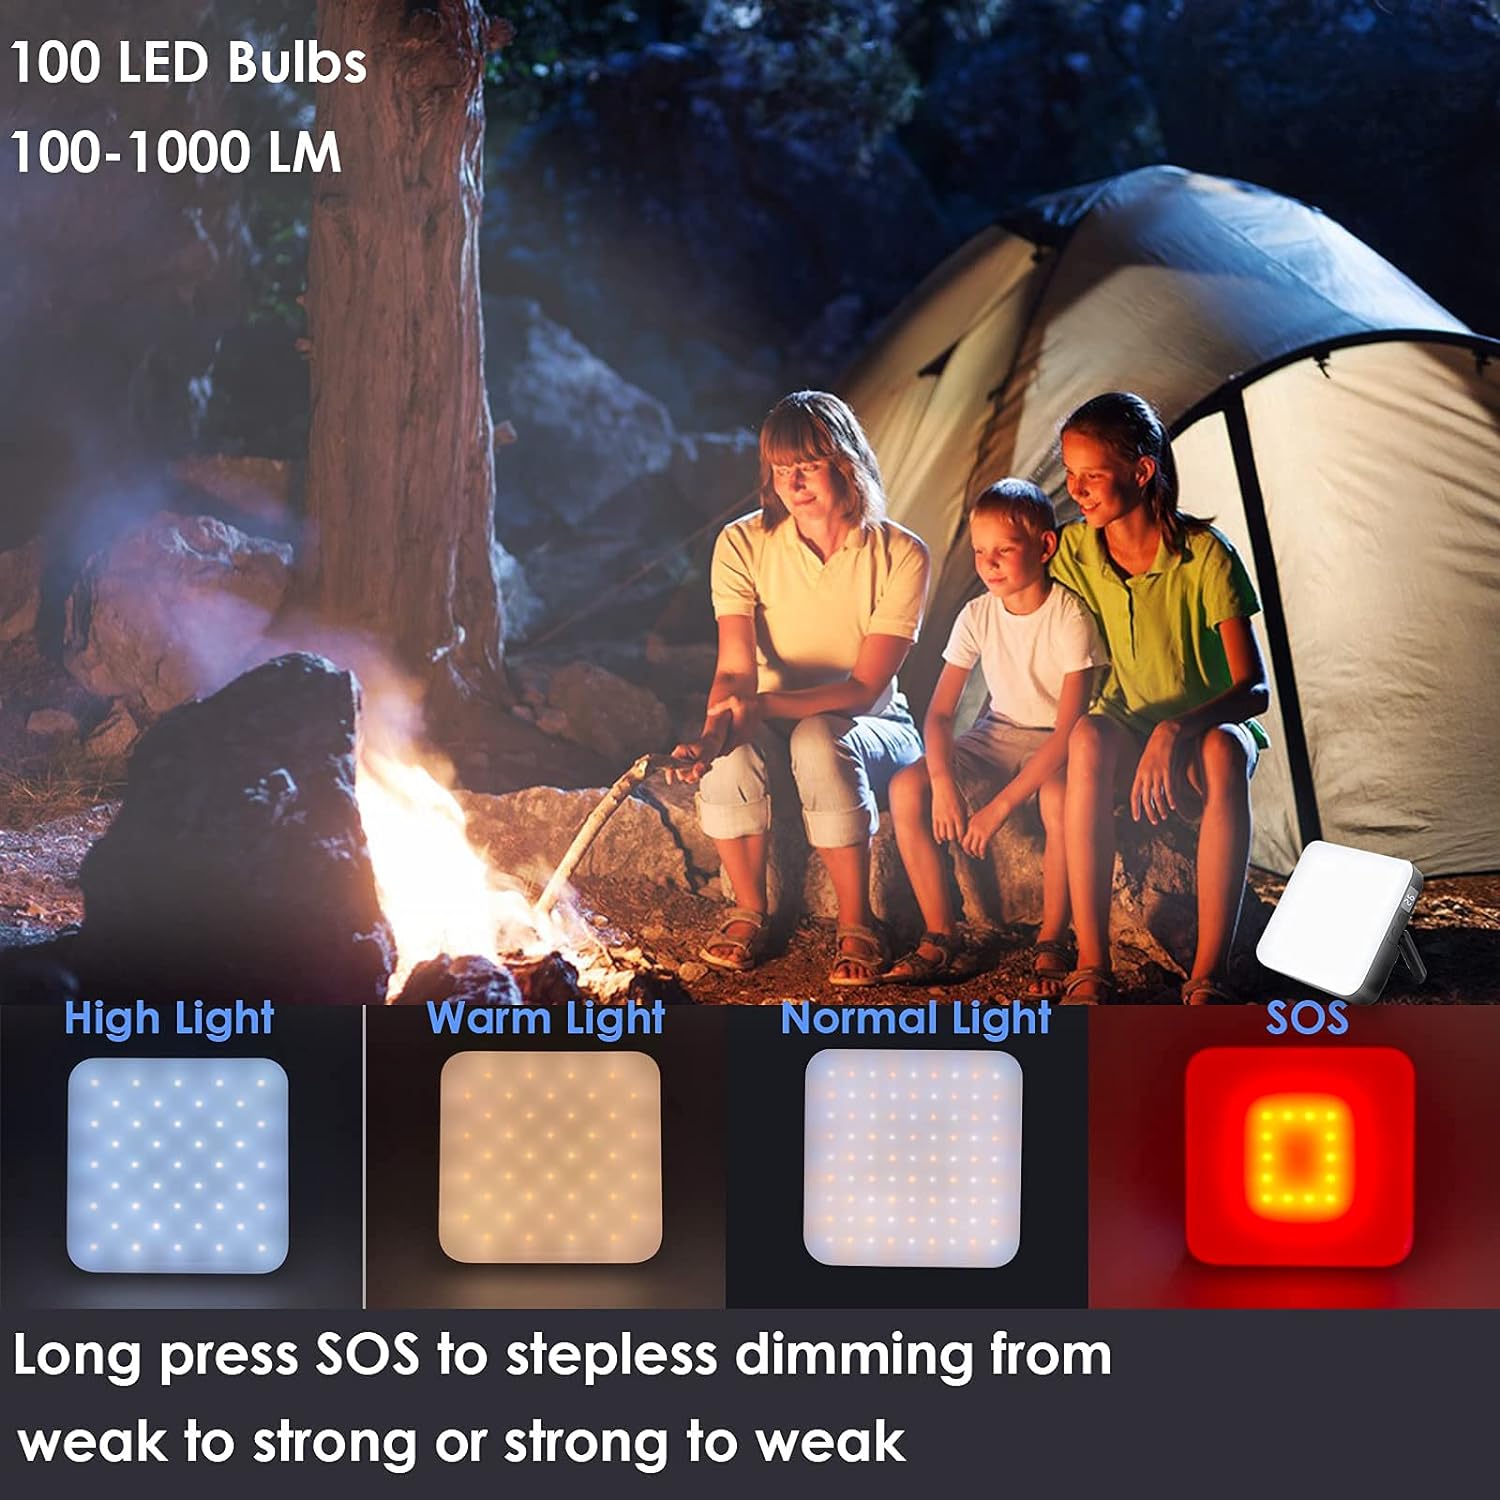 ibowee LED Camping Lantern Rechargeable,1000LM,13500mAh Power Bank Magnetic,up to 70 Hours,Digital Display Waterproof Emergency Light,Portable Lighting for Outages,Hiking,Hurricane